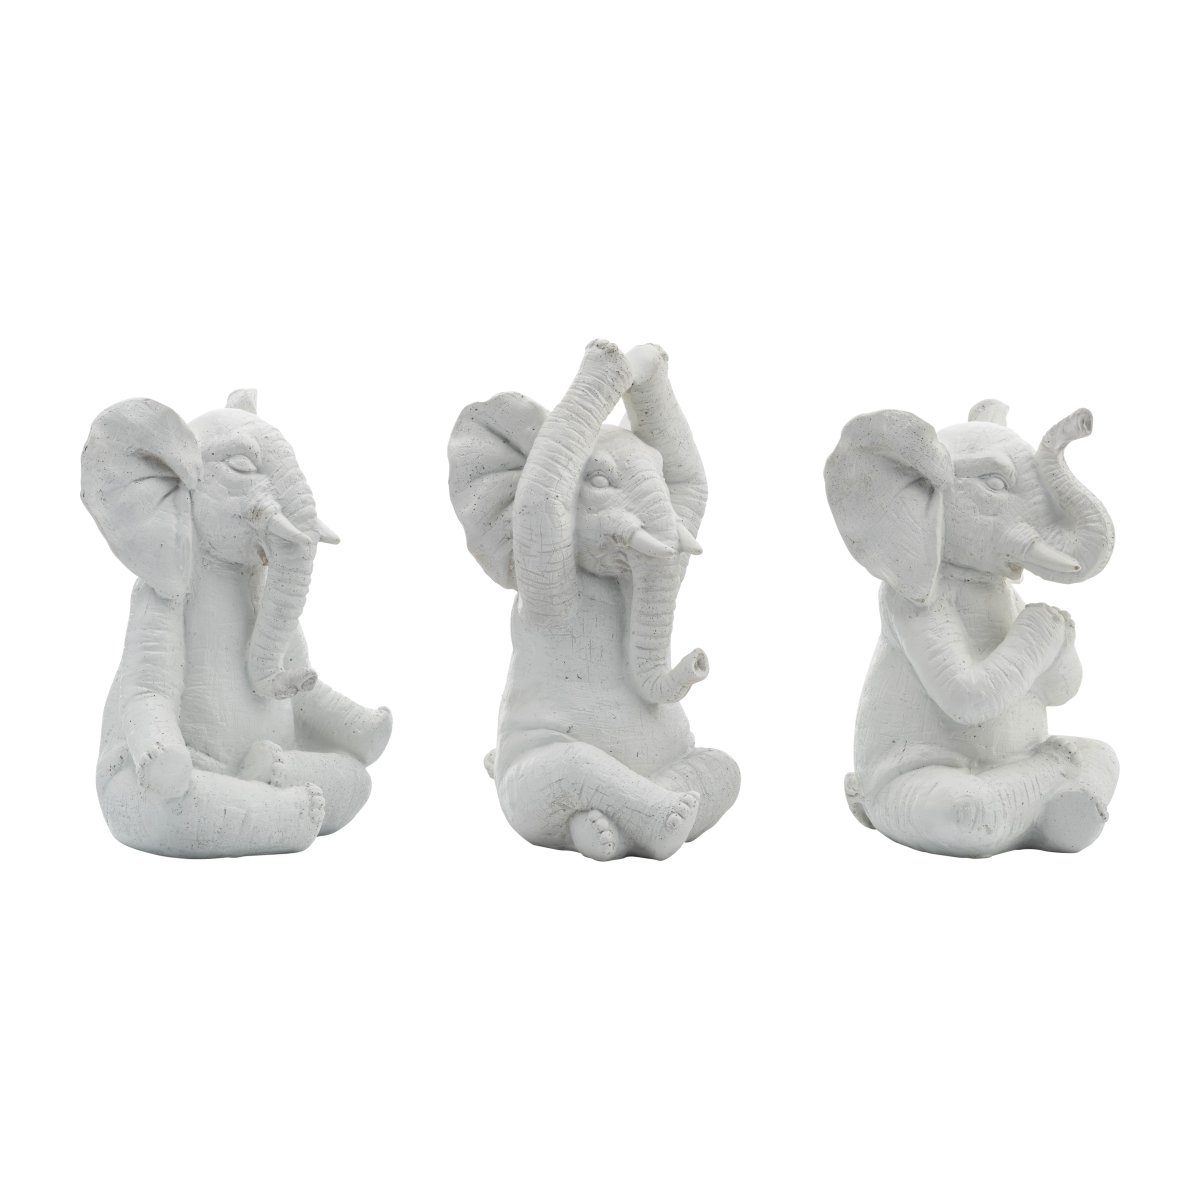 Picture of Sagebrook Home 17103-02 8 in. Resin Yoga Elephants Figurine, White - Set of 3